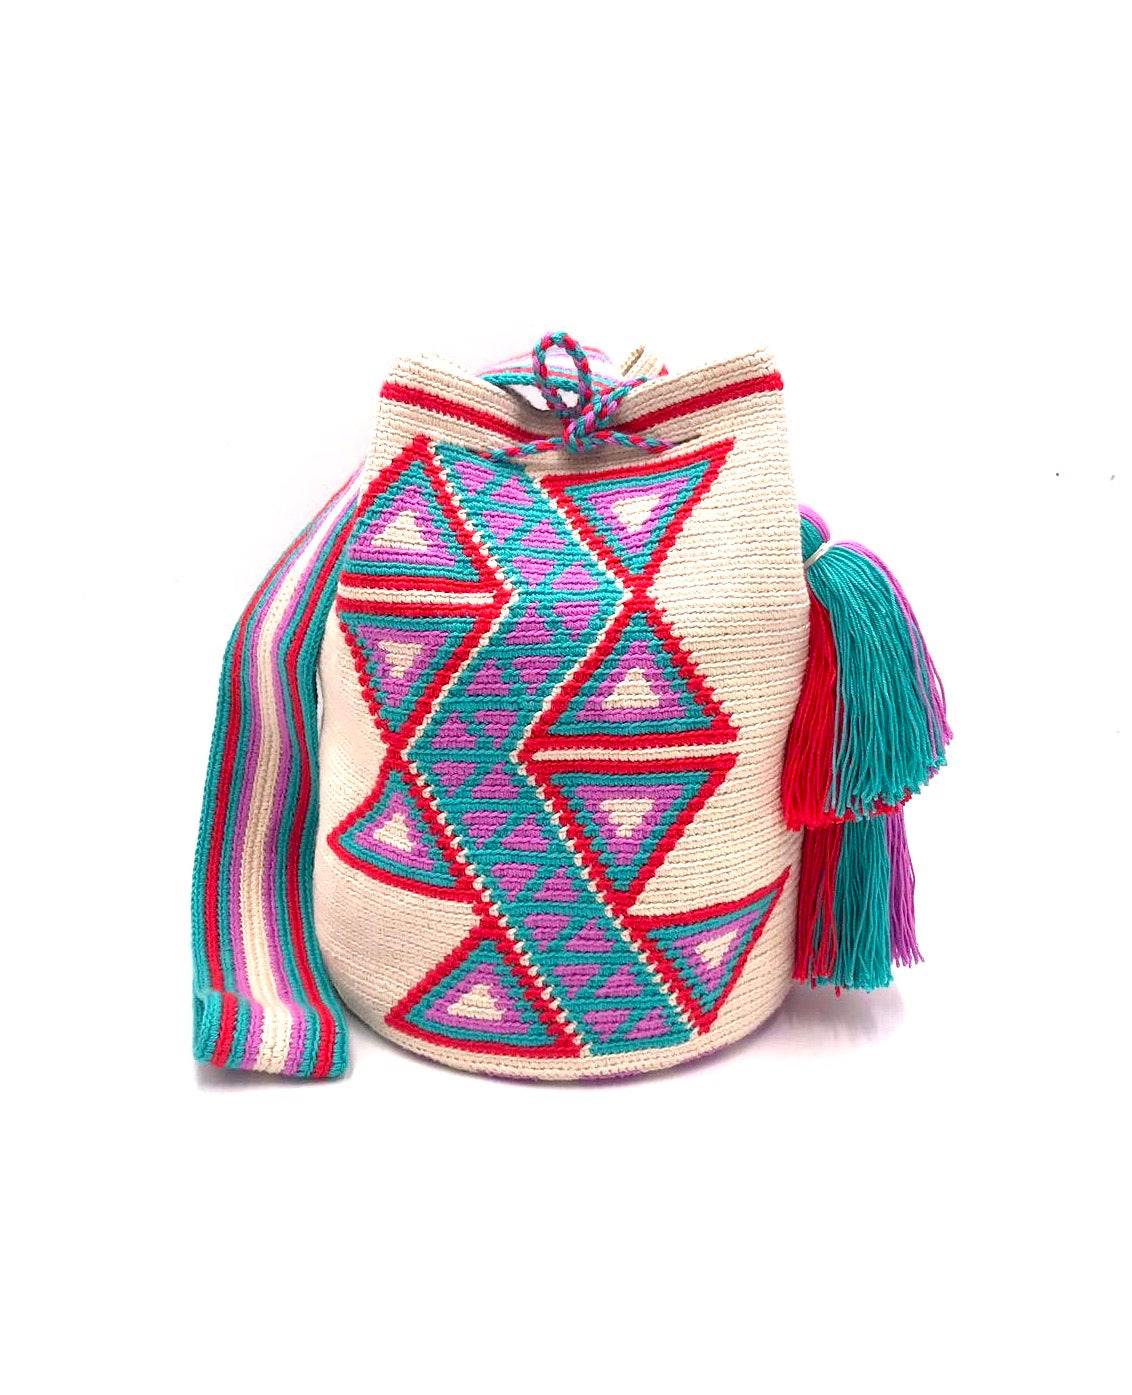 Cream color bag, central red and turquoise triangles with central turquoise sequence with little purple triangles and 2 tassels.